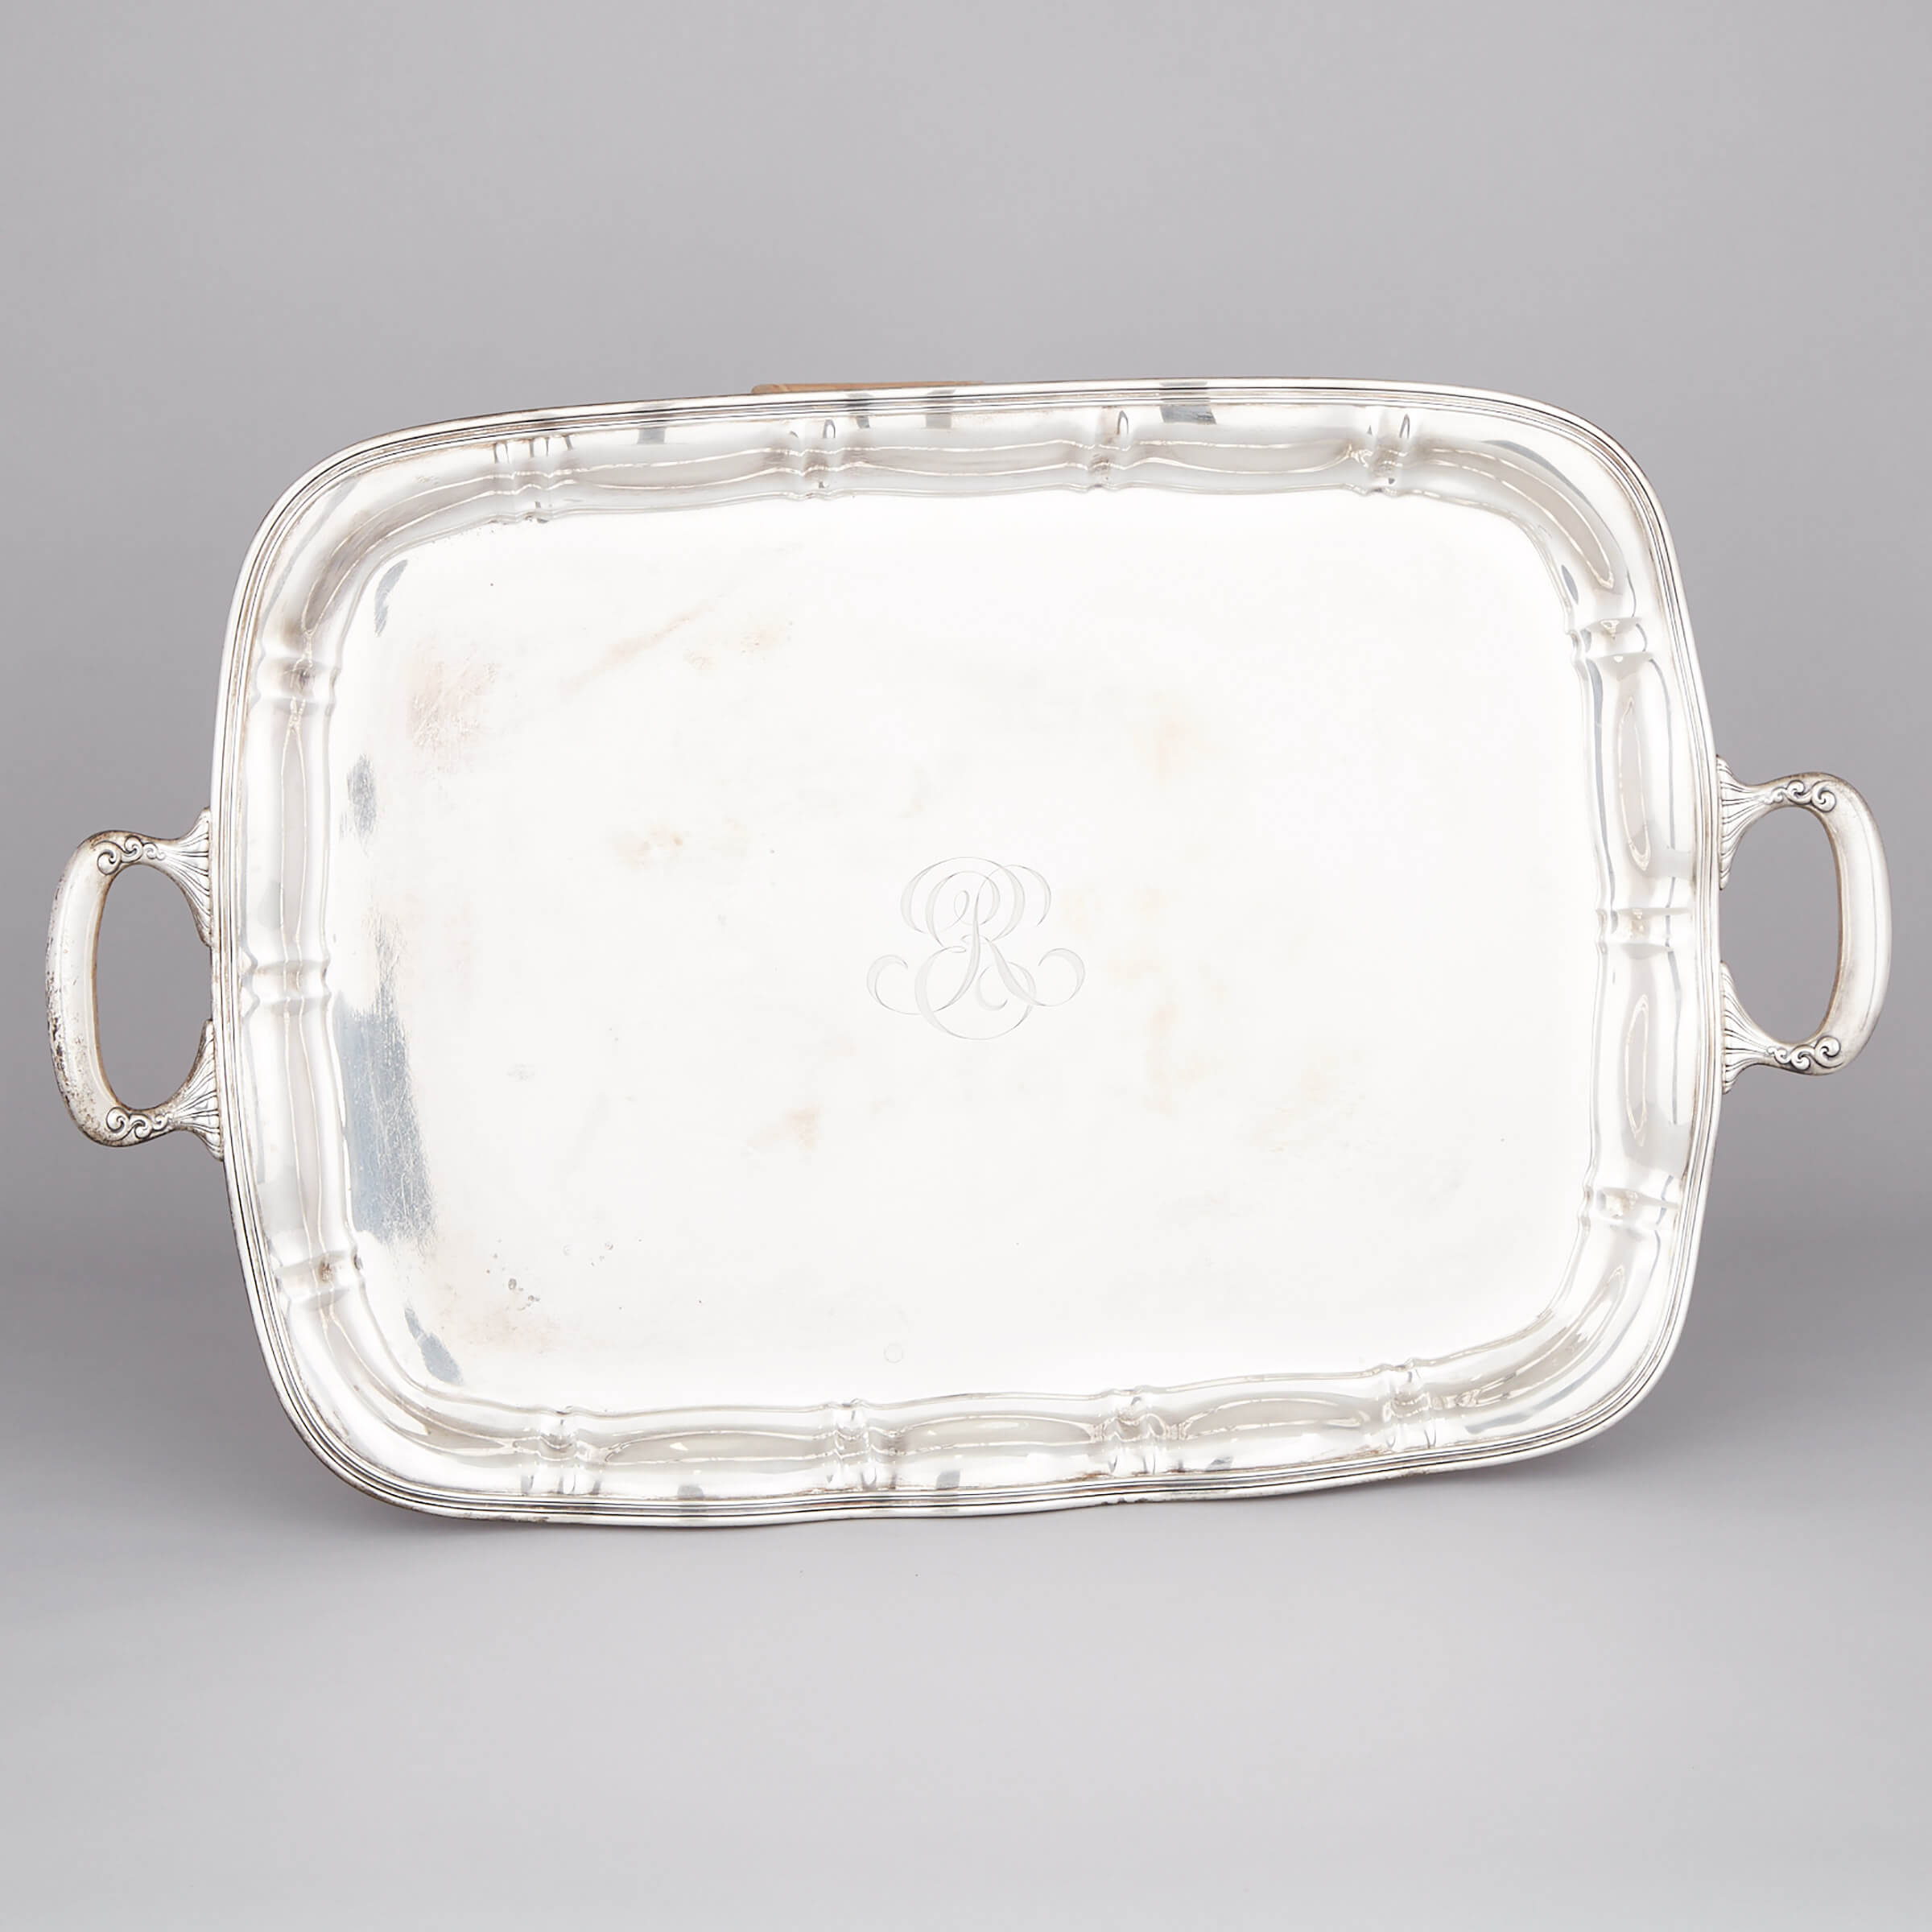 American Silver Large Two-Handled Serving Tray, Whiting Manufacturing Company, New York, N.Y., 1905